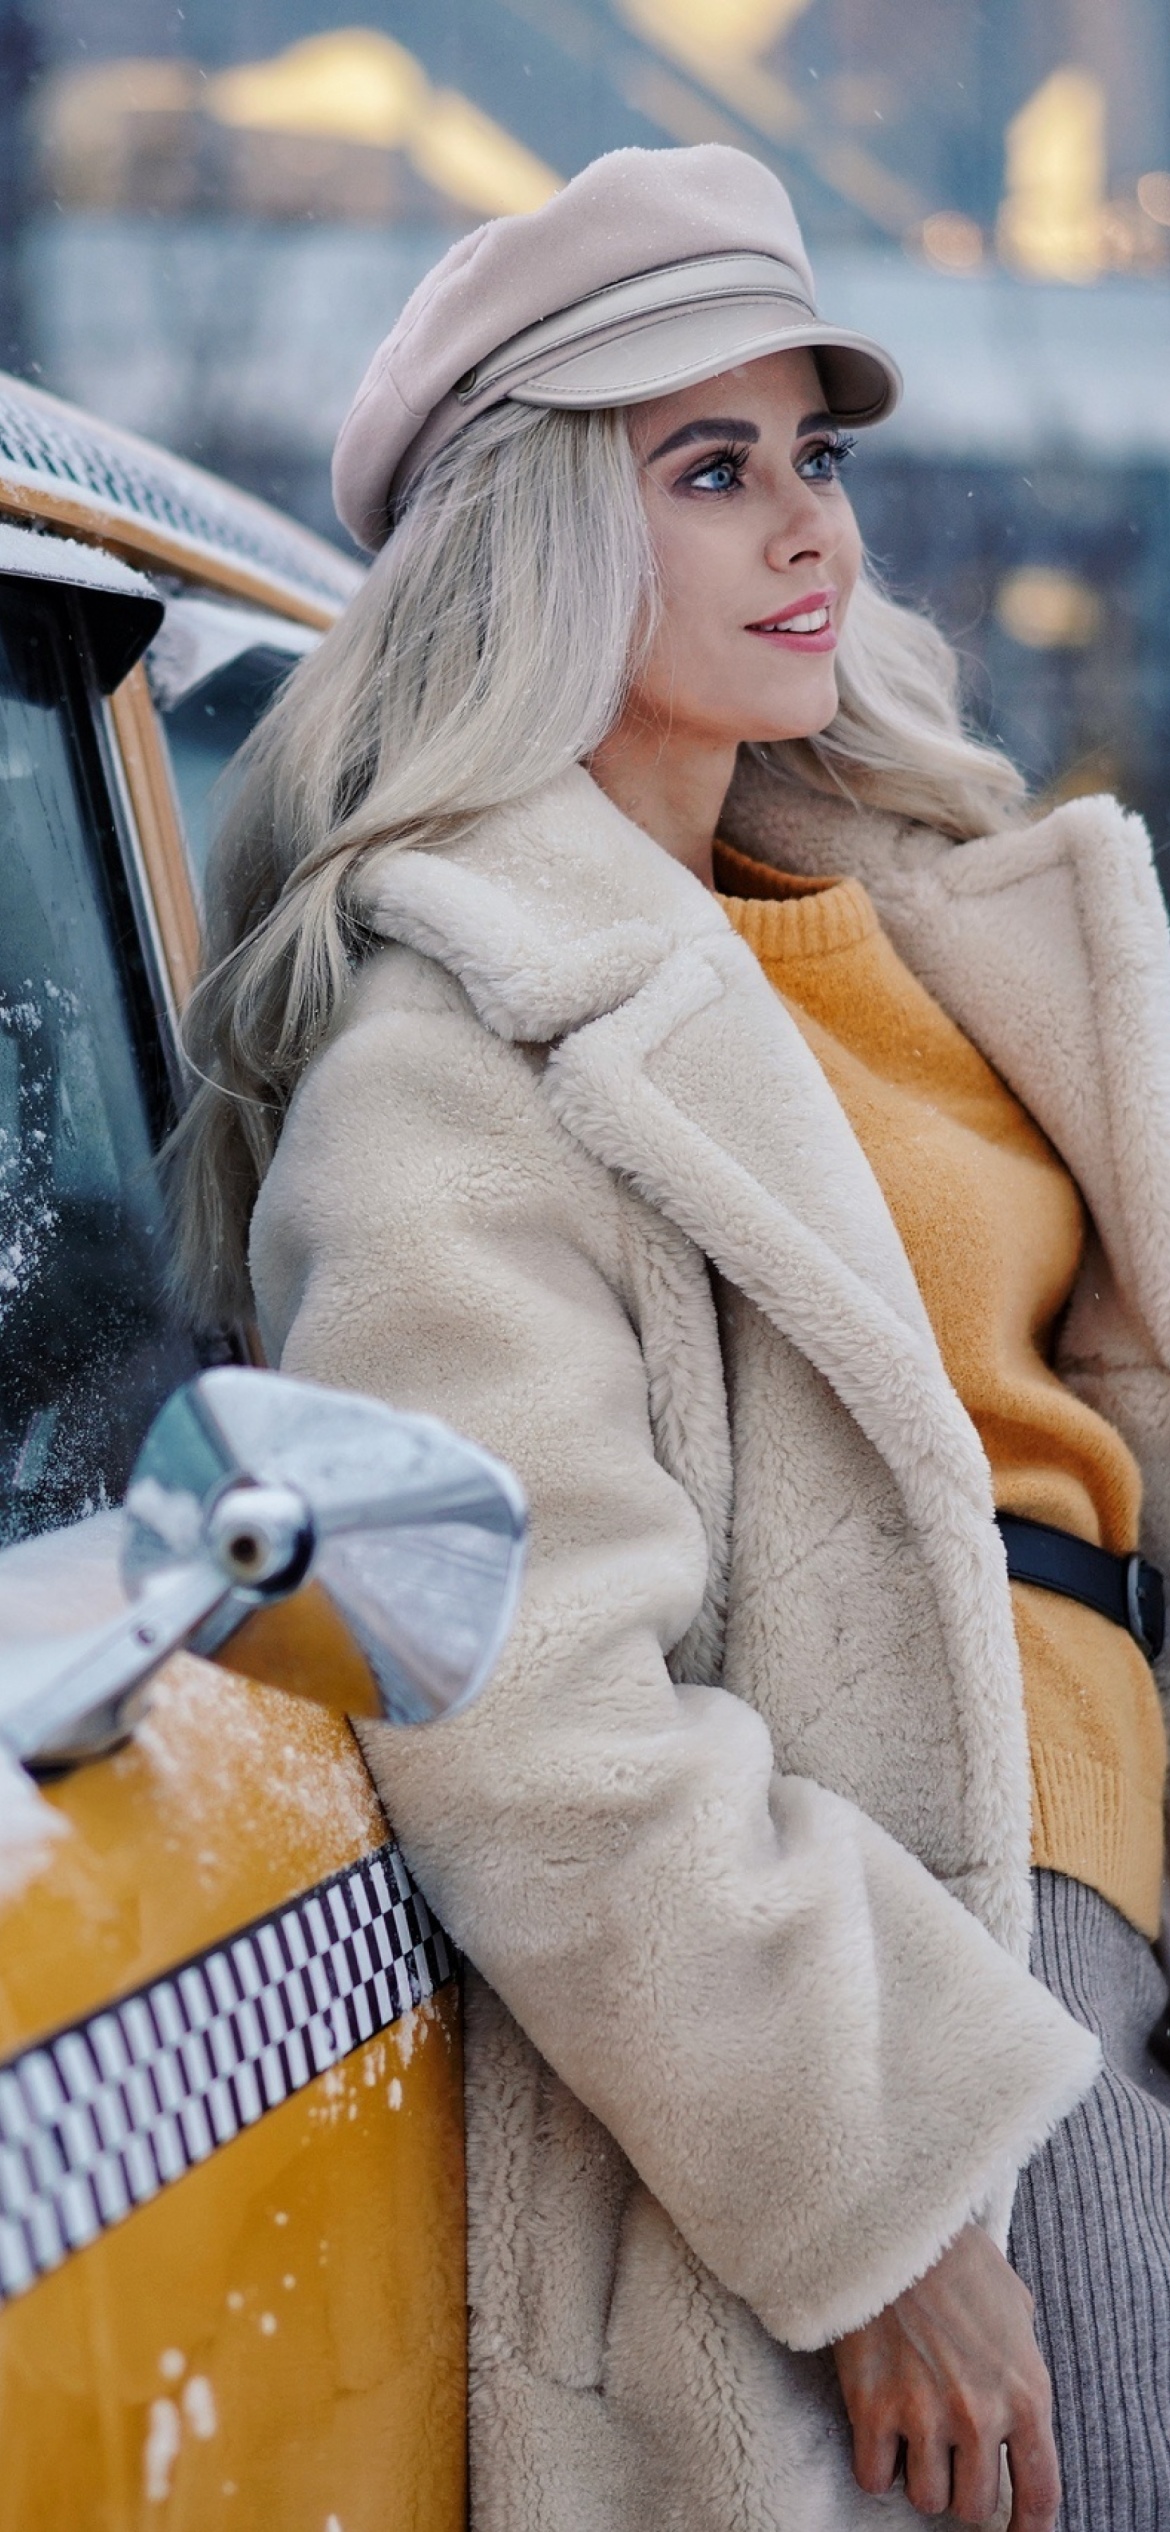 Winter Girl and Taxi wallpaper 1170x2532